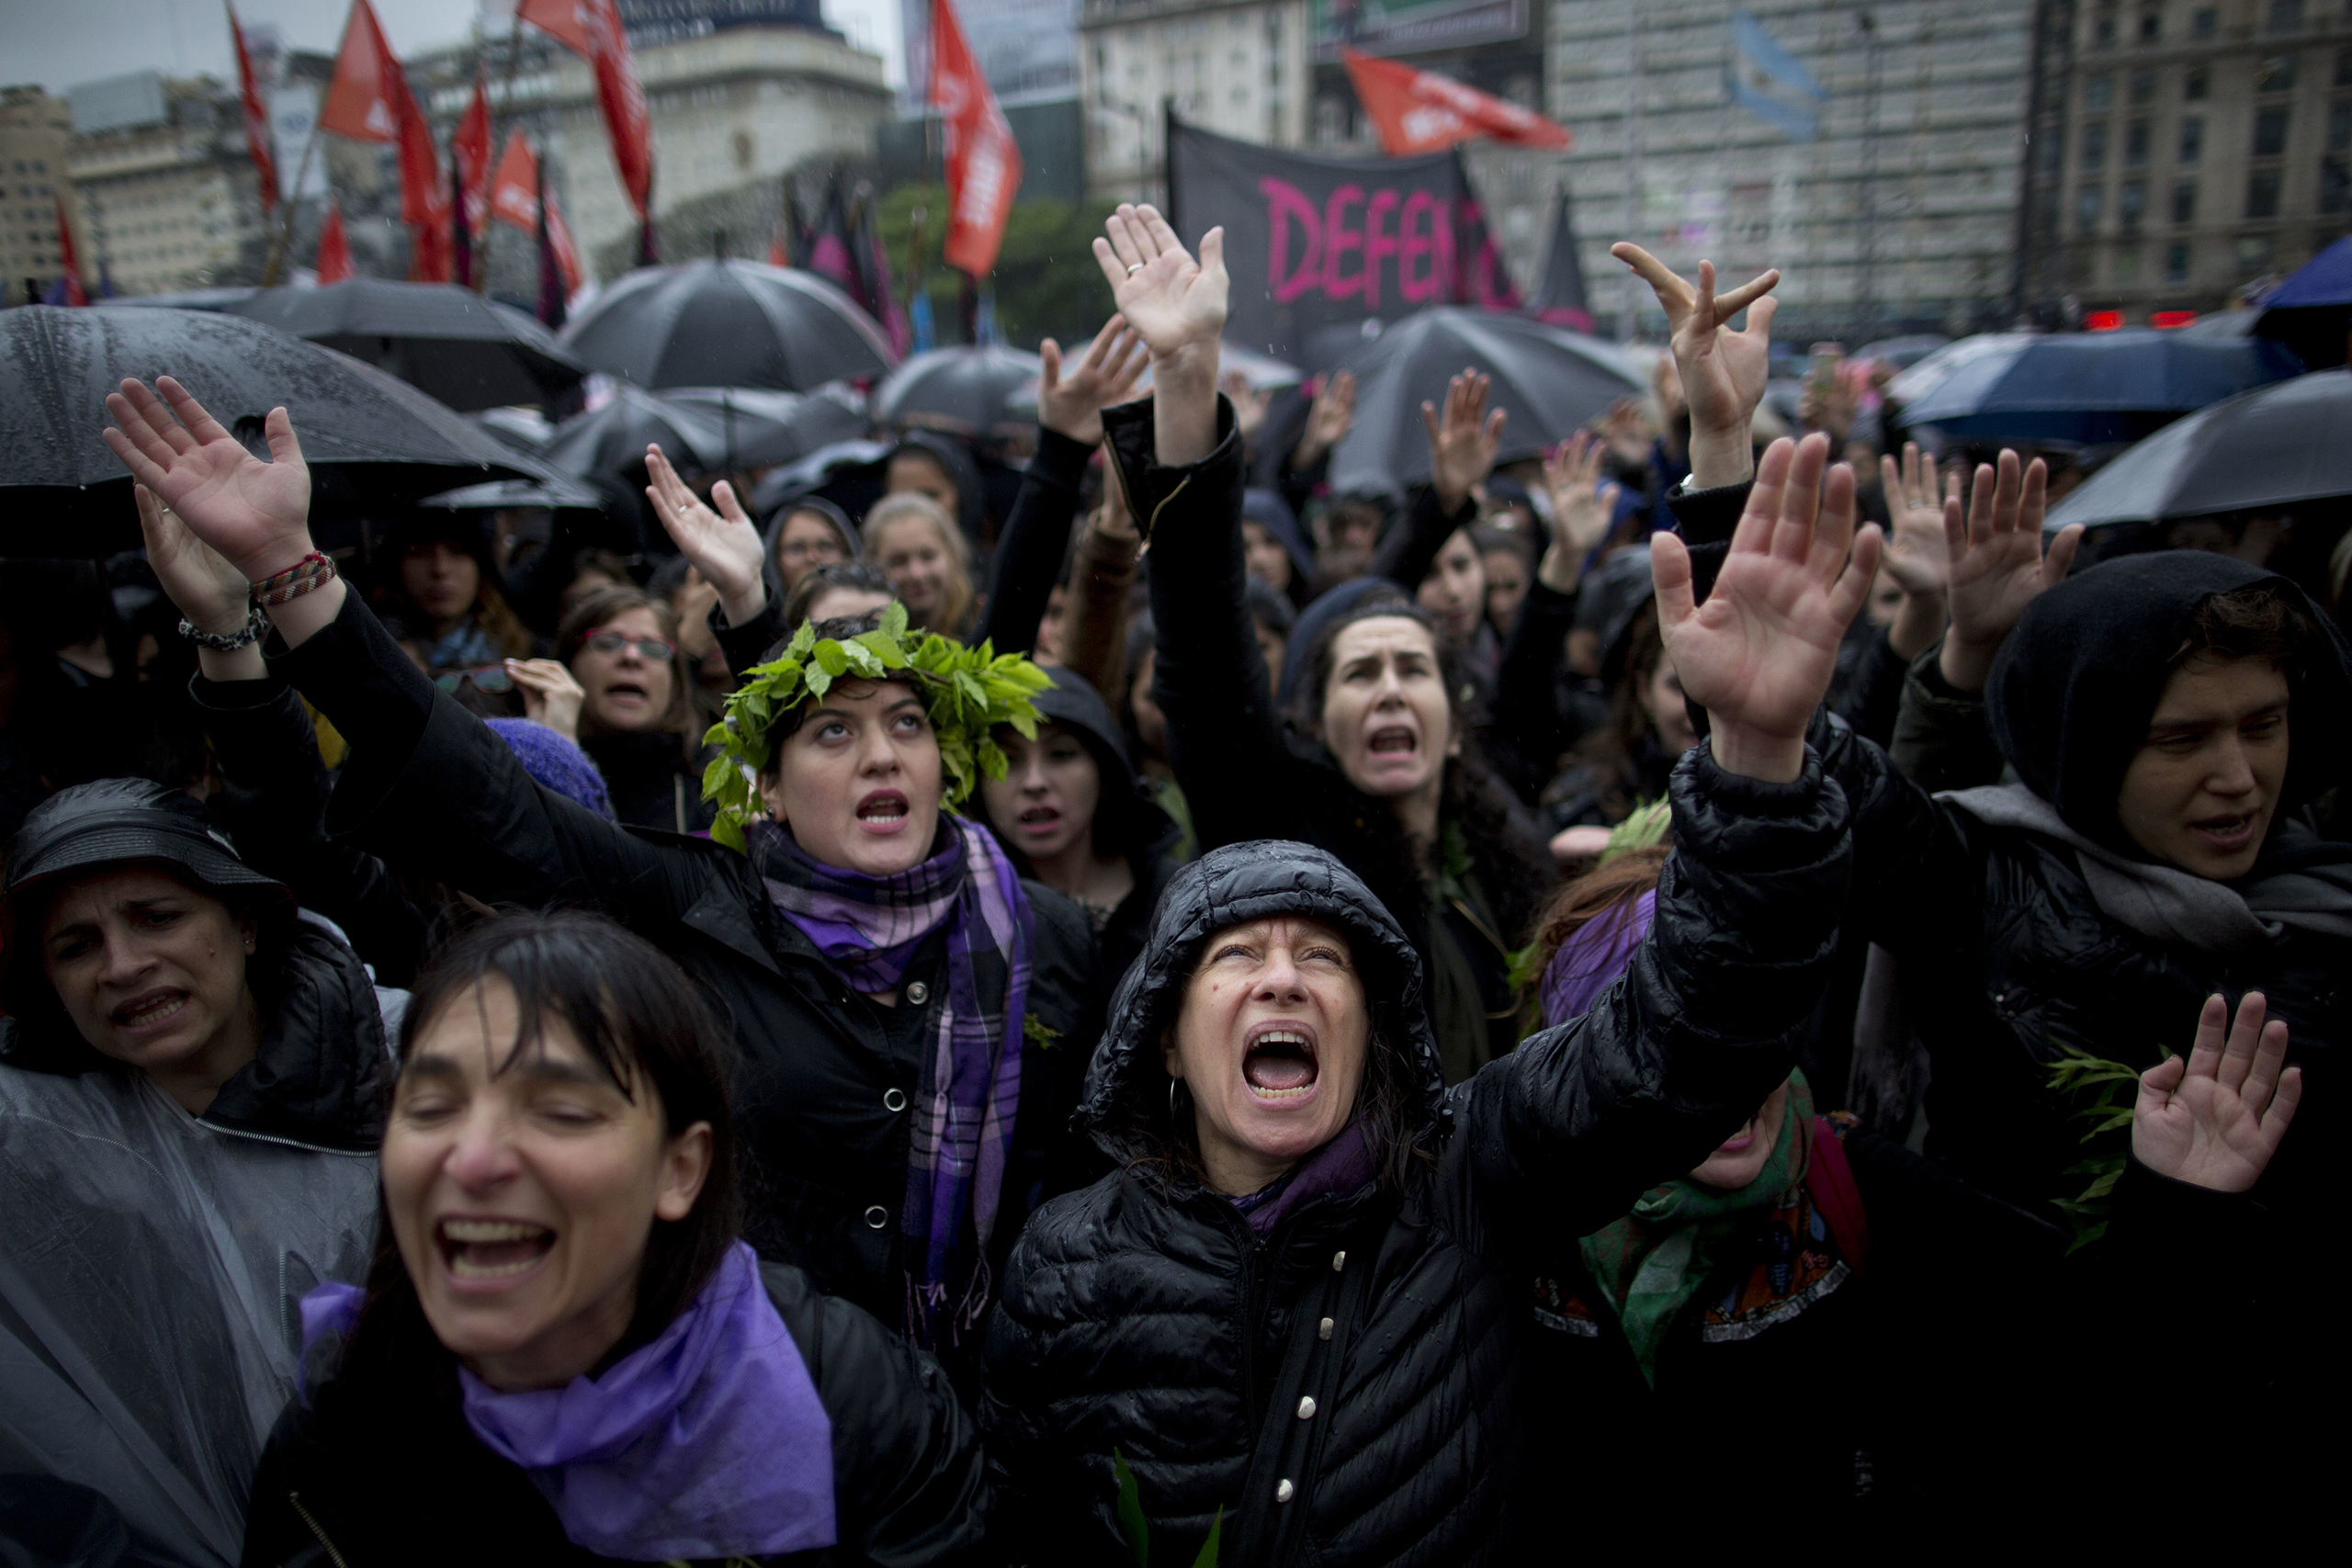 Women shout during a demonstrating against gender violence in Buenos Aires, Argentina, on Oct. 19, 2016. (Natacha Pisarenko—AP)